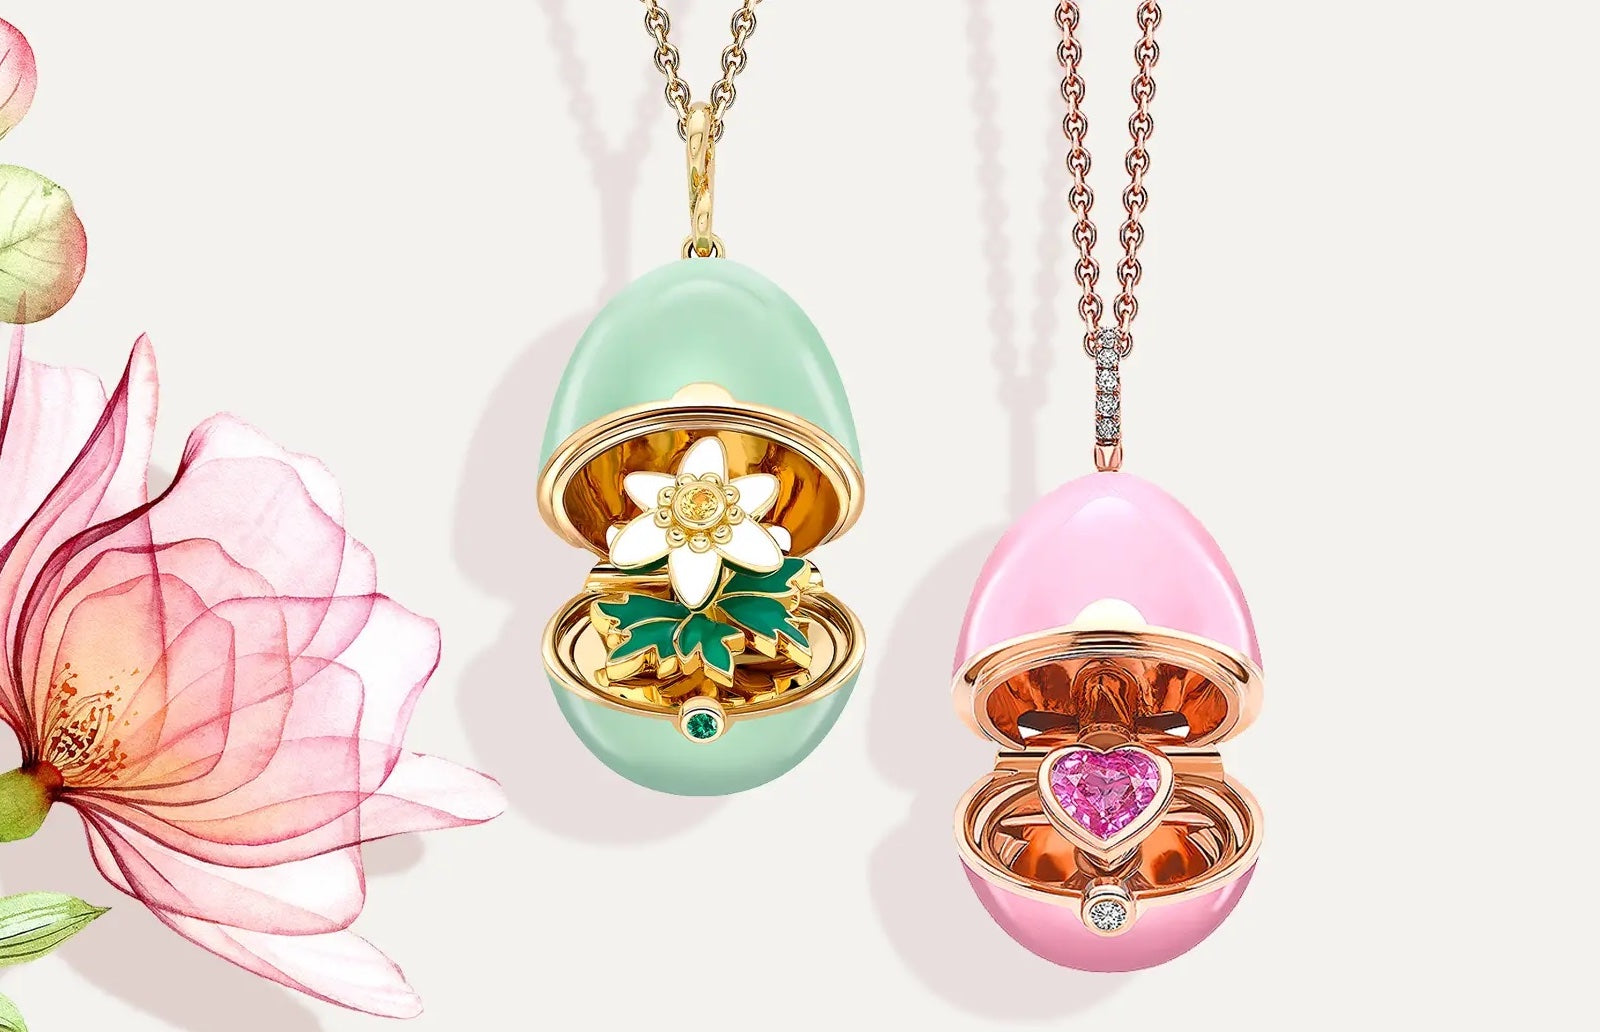 14 Best Jewelry Gifts Ideas for Easter